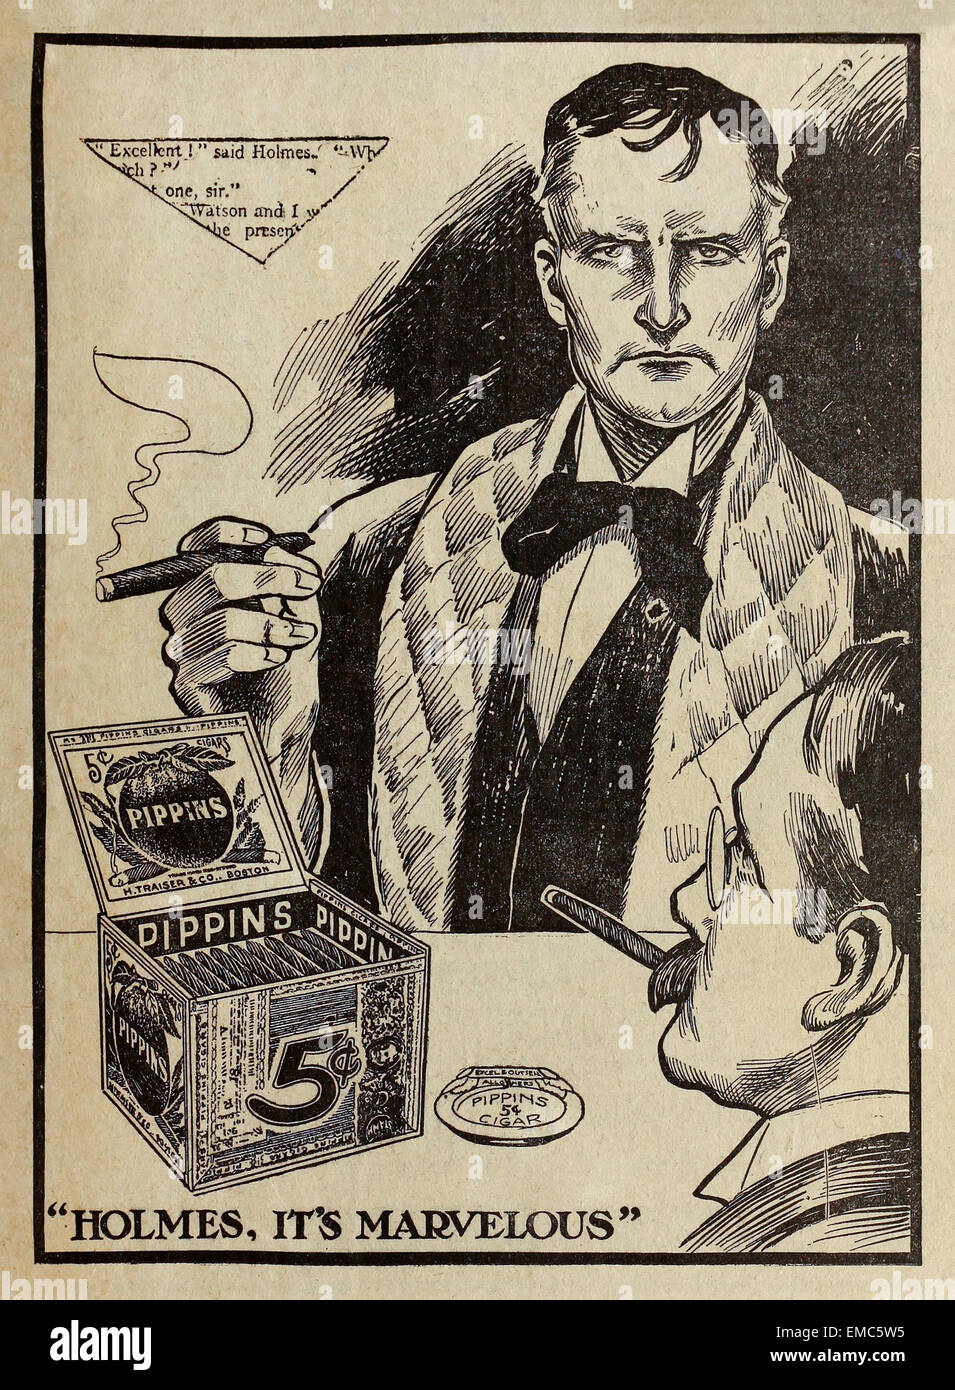 'Holmes, it's Marvelous' Pippins Cigar print advert featuring Sherlock Holmes and Dr. Watson. From a series of booklets distributed with The Boston Sunday Post in 1911. Pippins Cigars were manufactured by Traiser & Co. Inc. Boston. Sherlock is drawn to resemble actor William Gillette who portrayed the detective on stage in a highly successful tour around the UK and US. Stock Photo